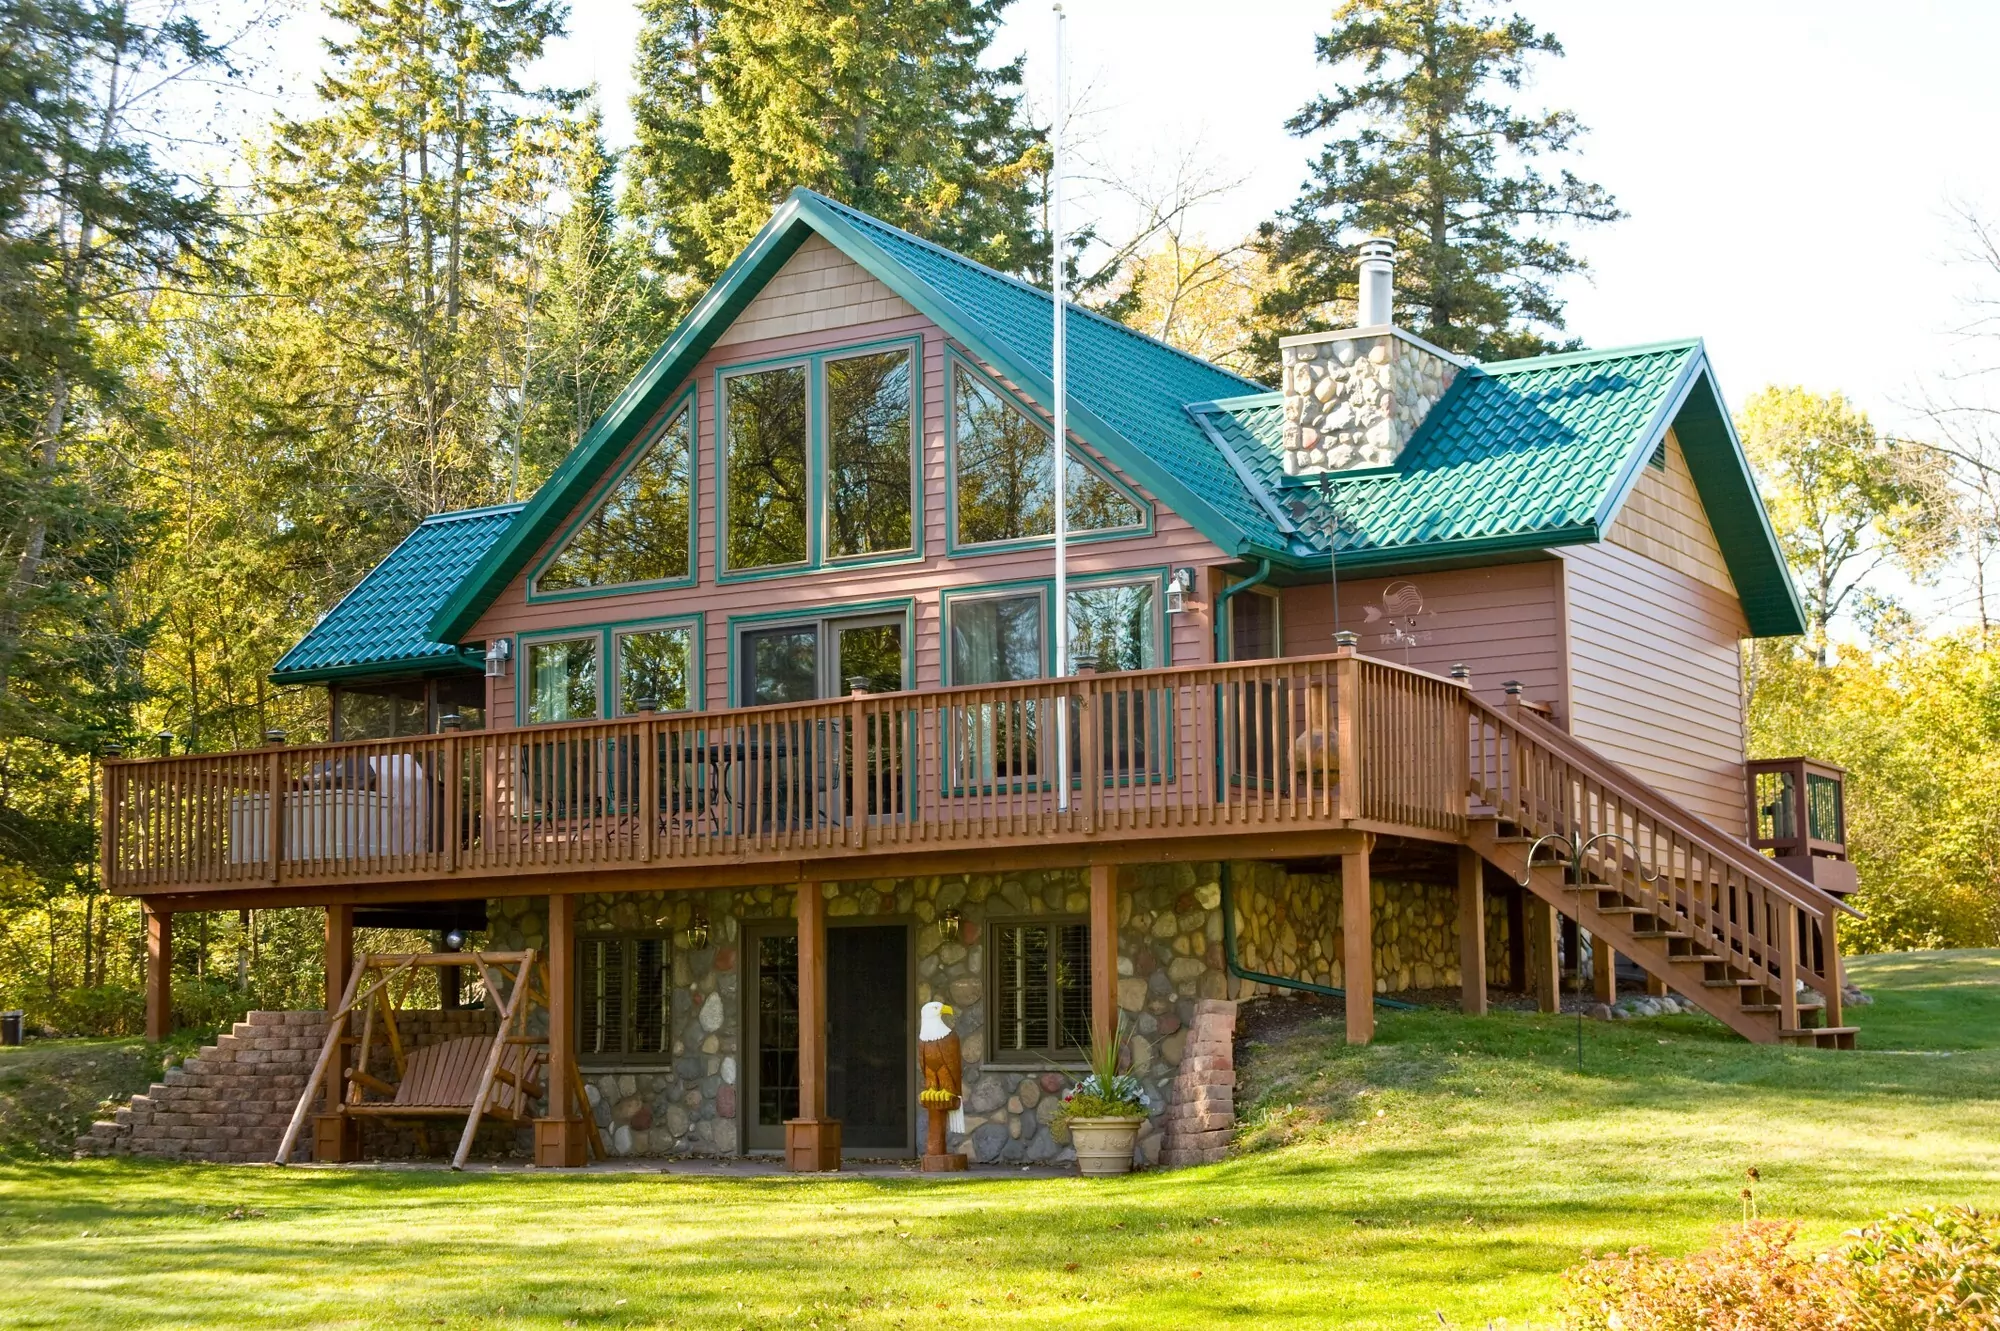 Large cabin style home with steel siding and roofing